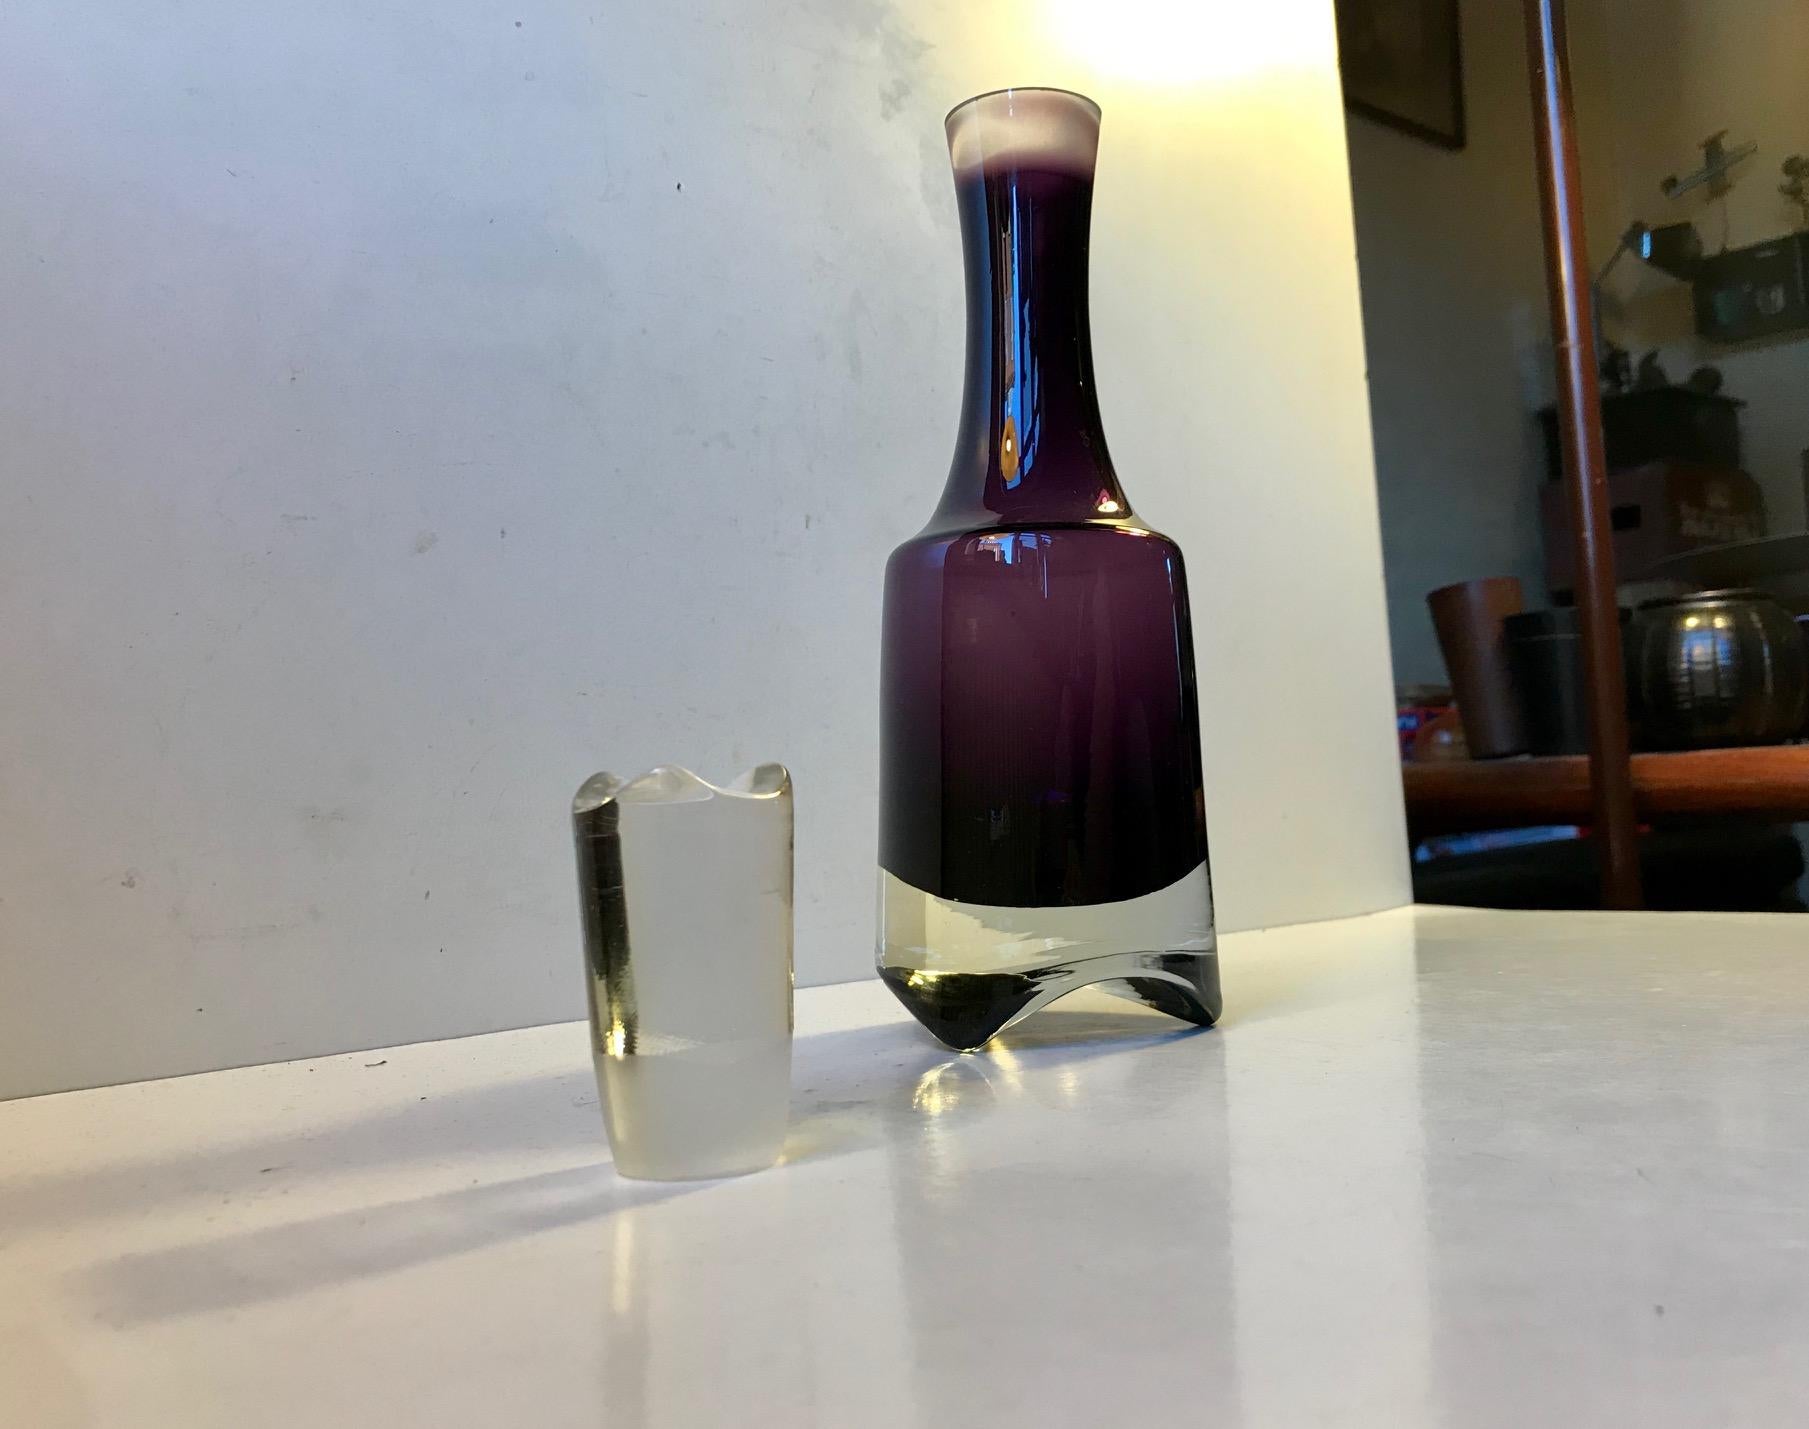 A modernist/Brutalist styled decanter for Gin or Vodka. It’s made from amethyst summerso glass. Notice that the tristand formation to the bottom matches the shape of the stopper. It’s manufactured in Scandinavia during the 1970s probably by either